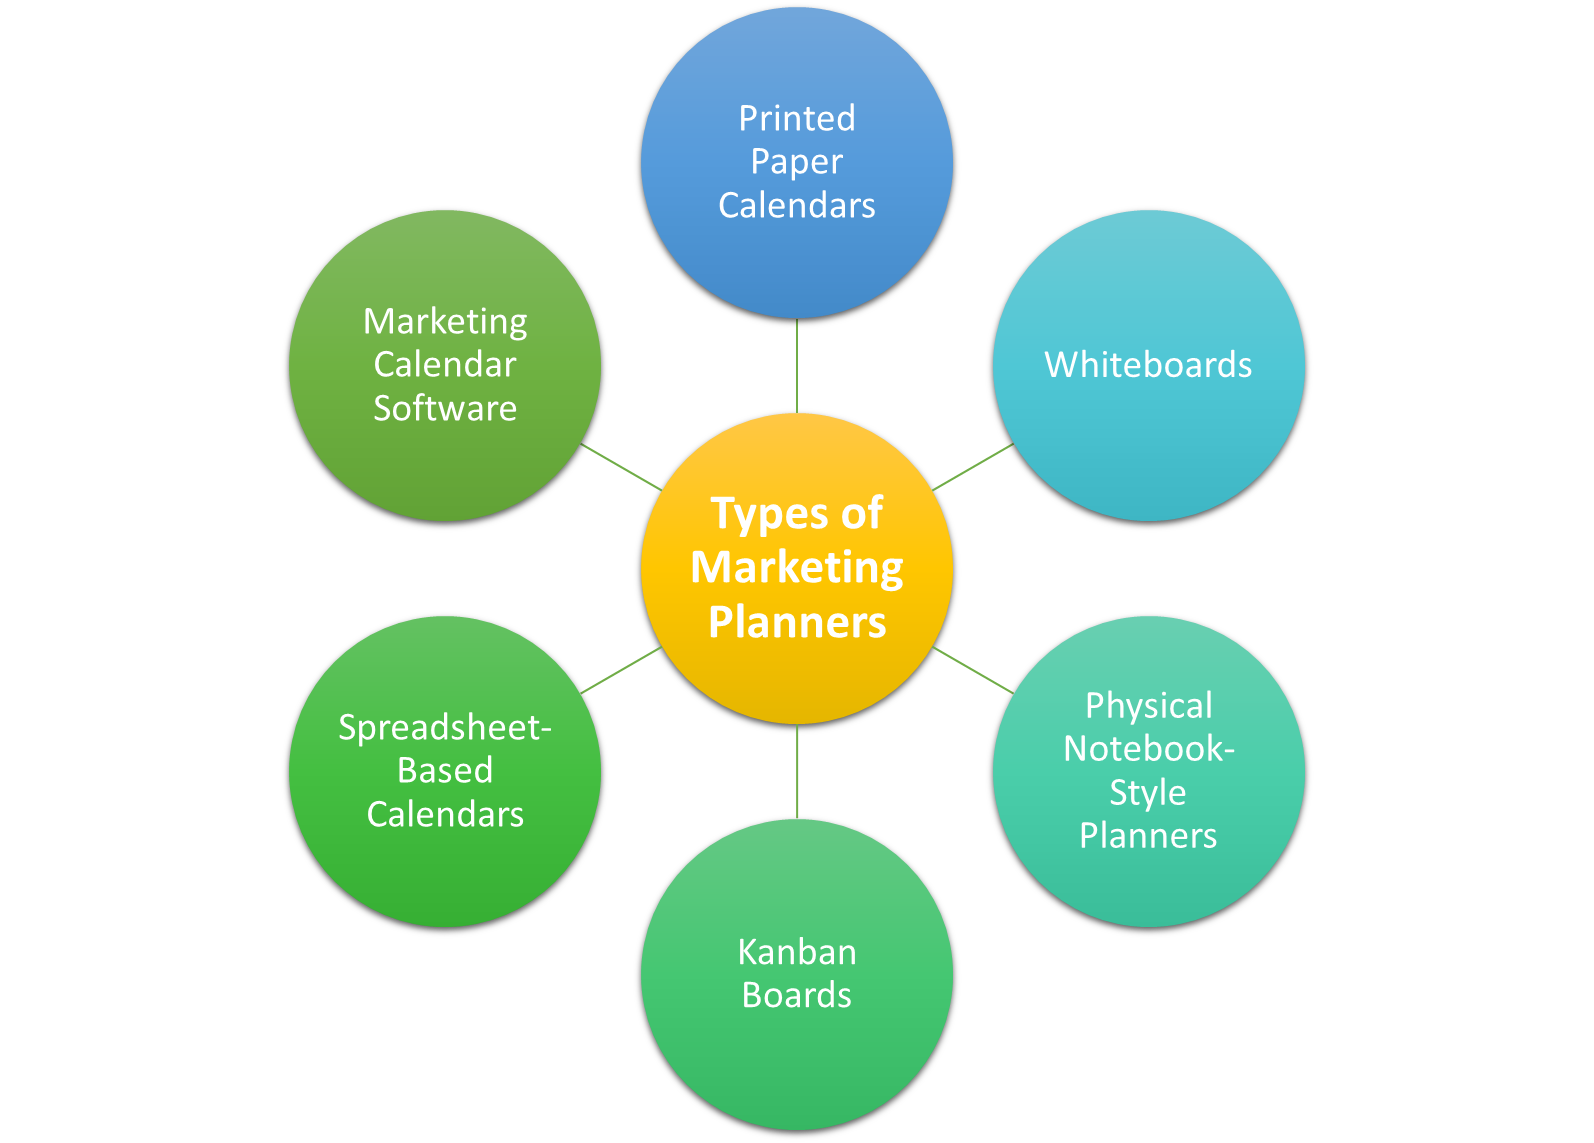 Types of Marketing Planners